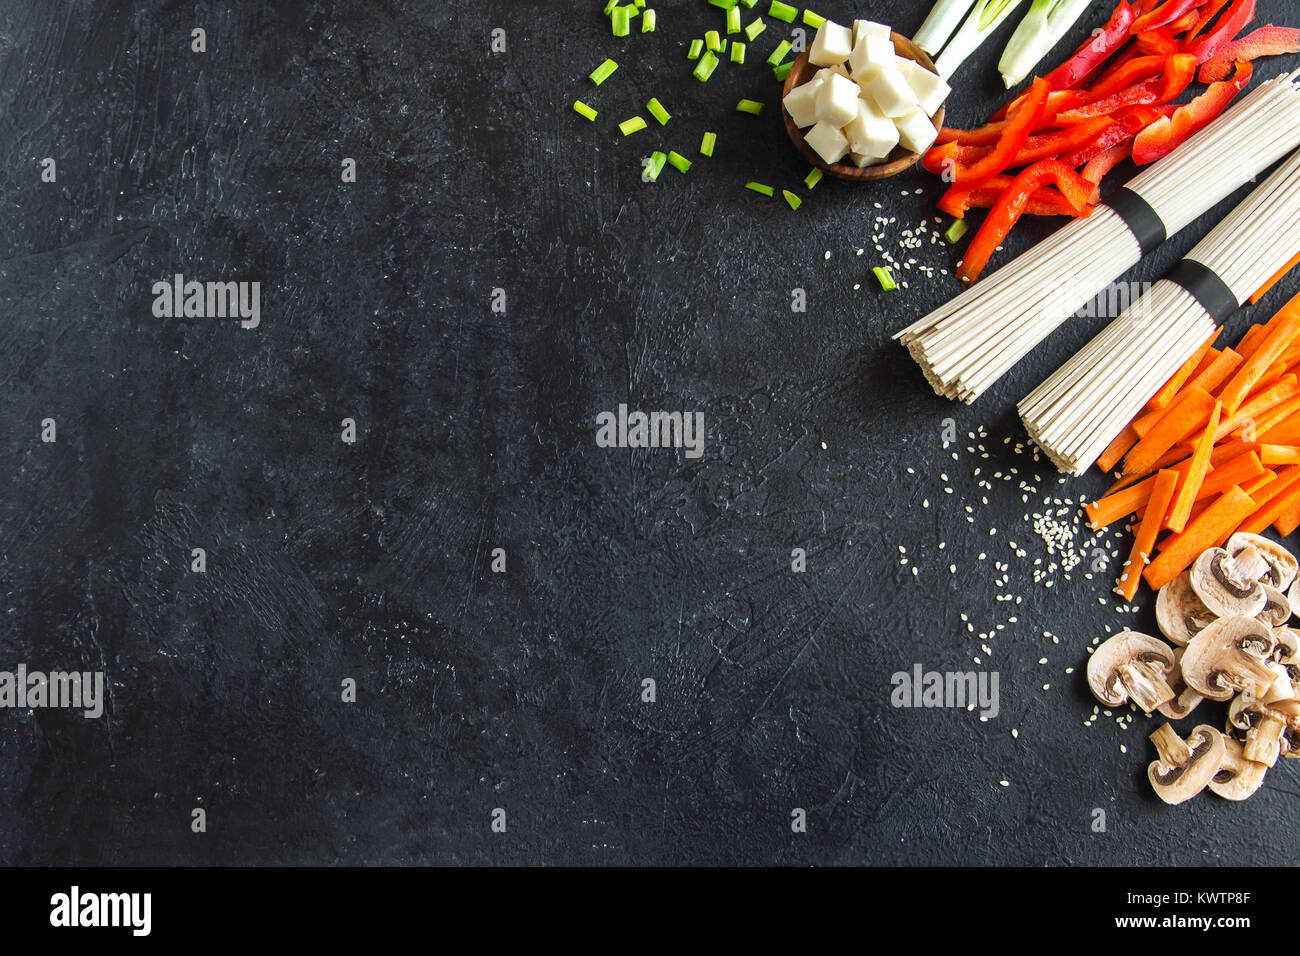 Vegetarian cooking ingredients for stir fry with tofu, noodles and vegetables. Asian vegan cuisine ingredients over black stone background with copy s Stock Photo